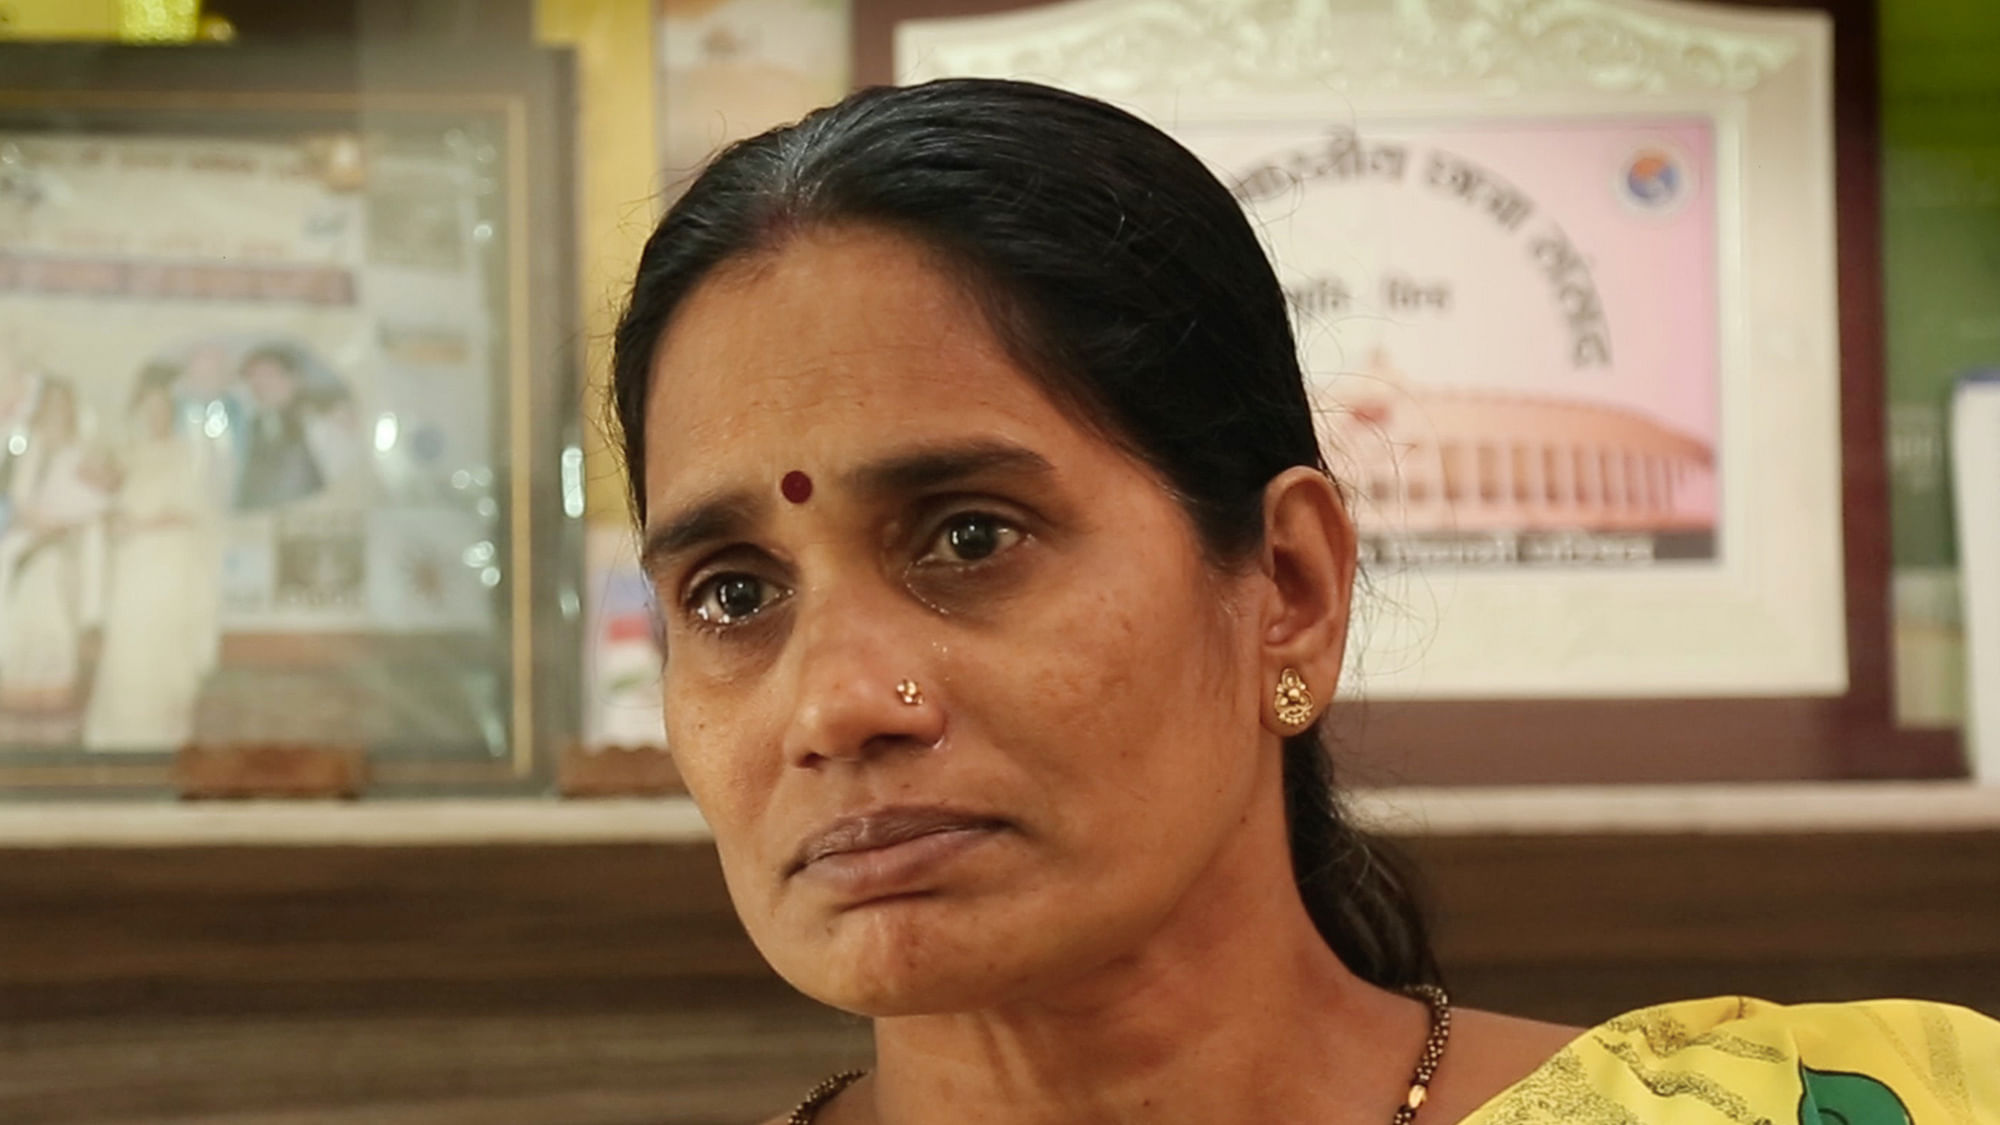  Nirbhaya’s mother breaks down while talking to <b>The Quint</b>. (Photo: <b>The Quint</b>)<a href="http://www.thequint.com/section/India"></a>